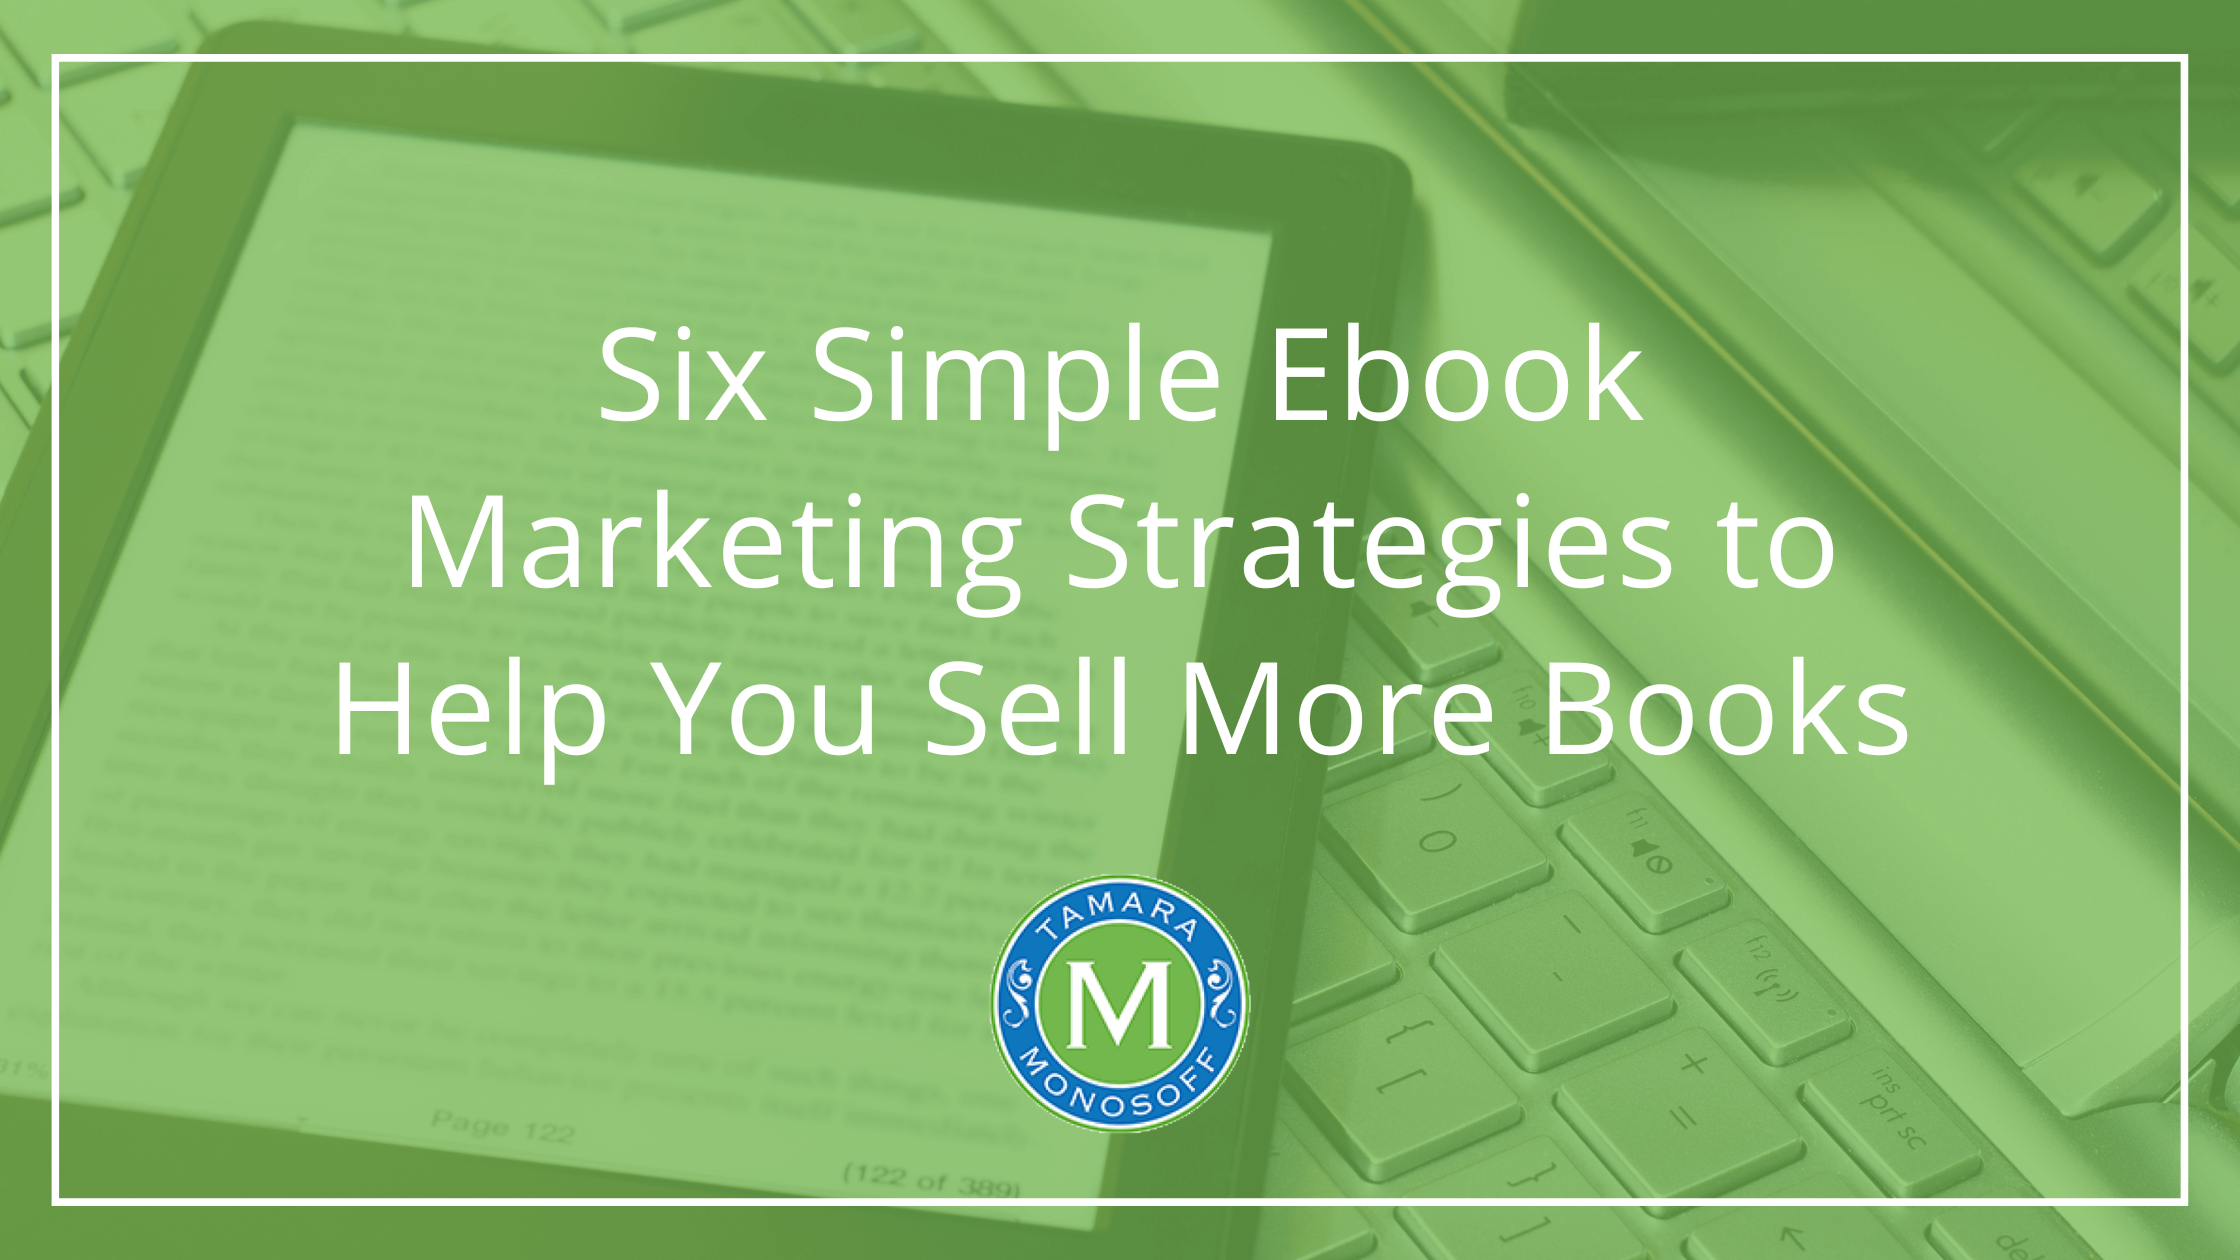 Six Simple Ebook Marketing Strategies to Help You Sell More Books